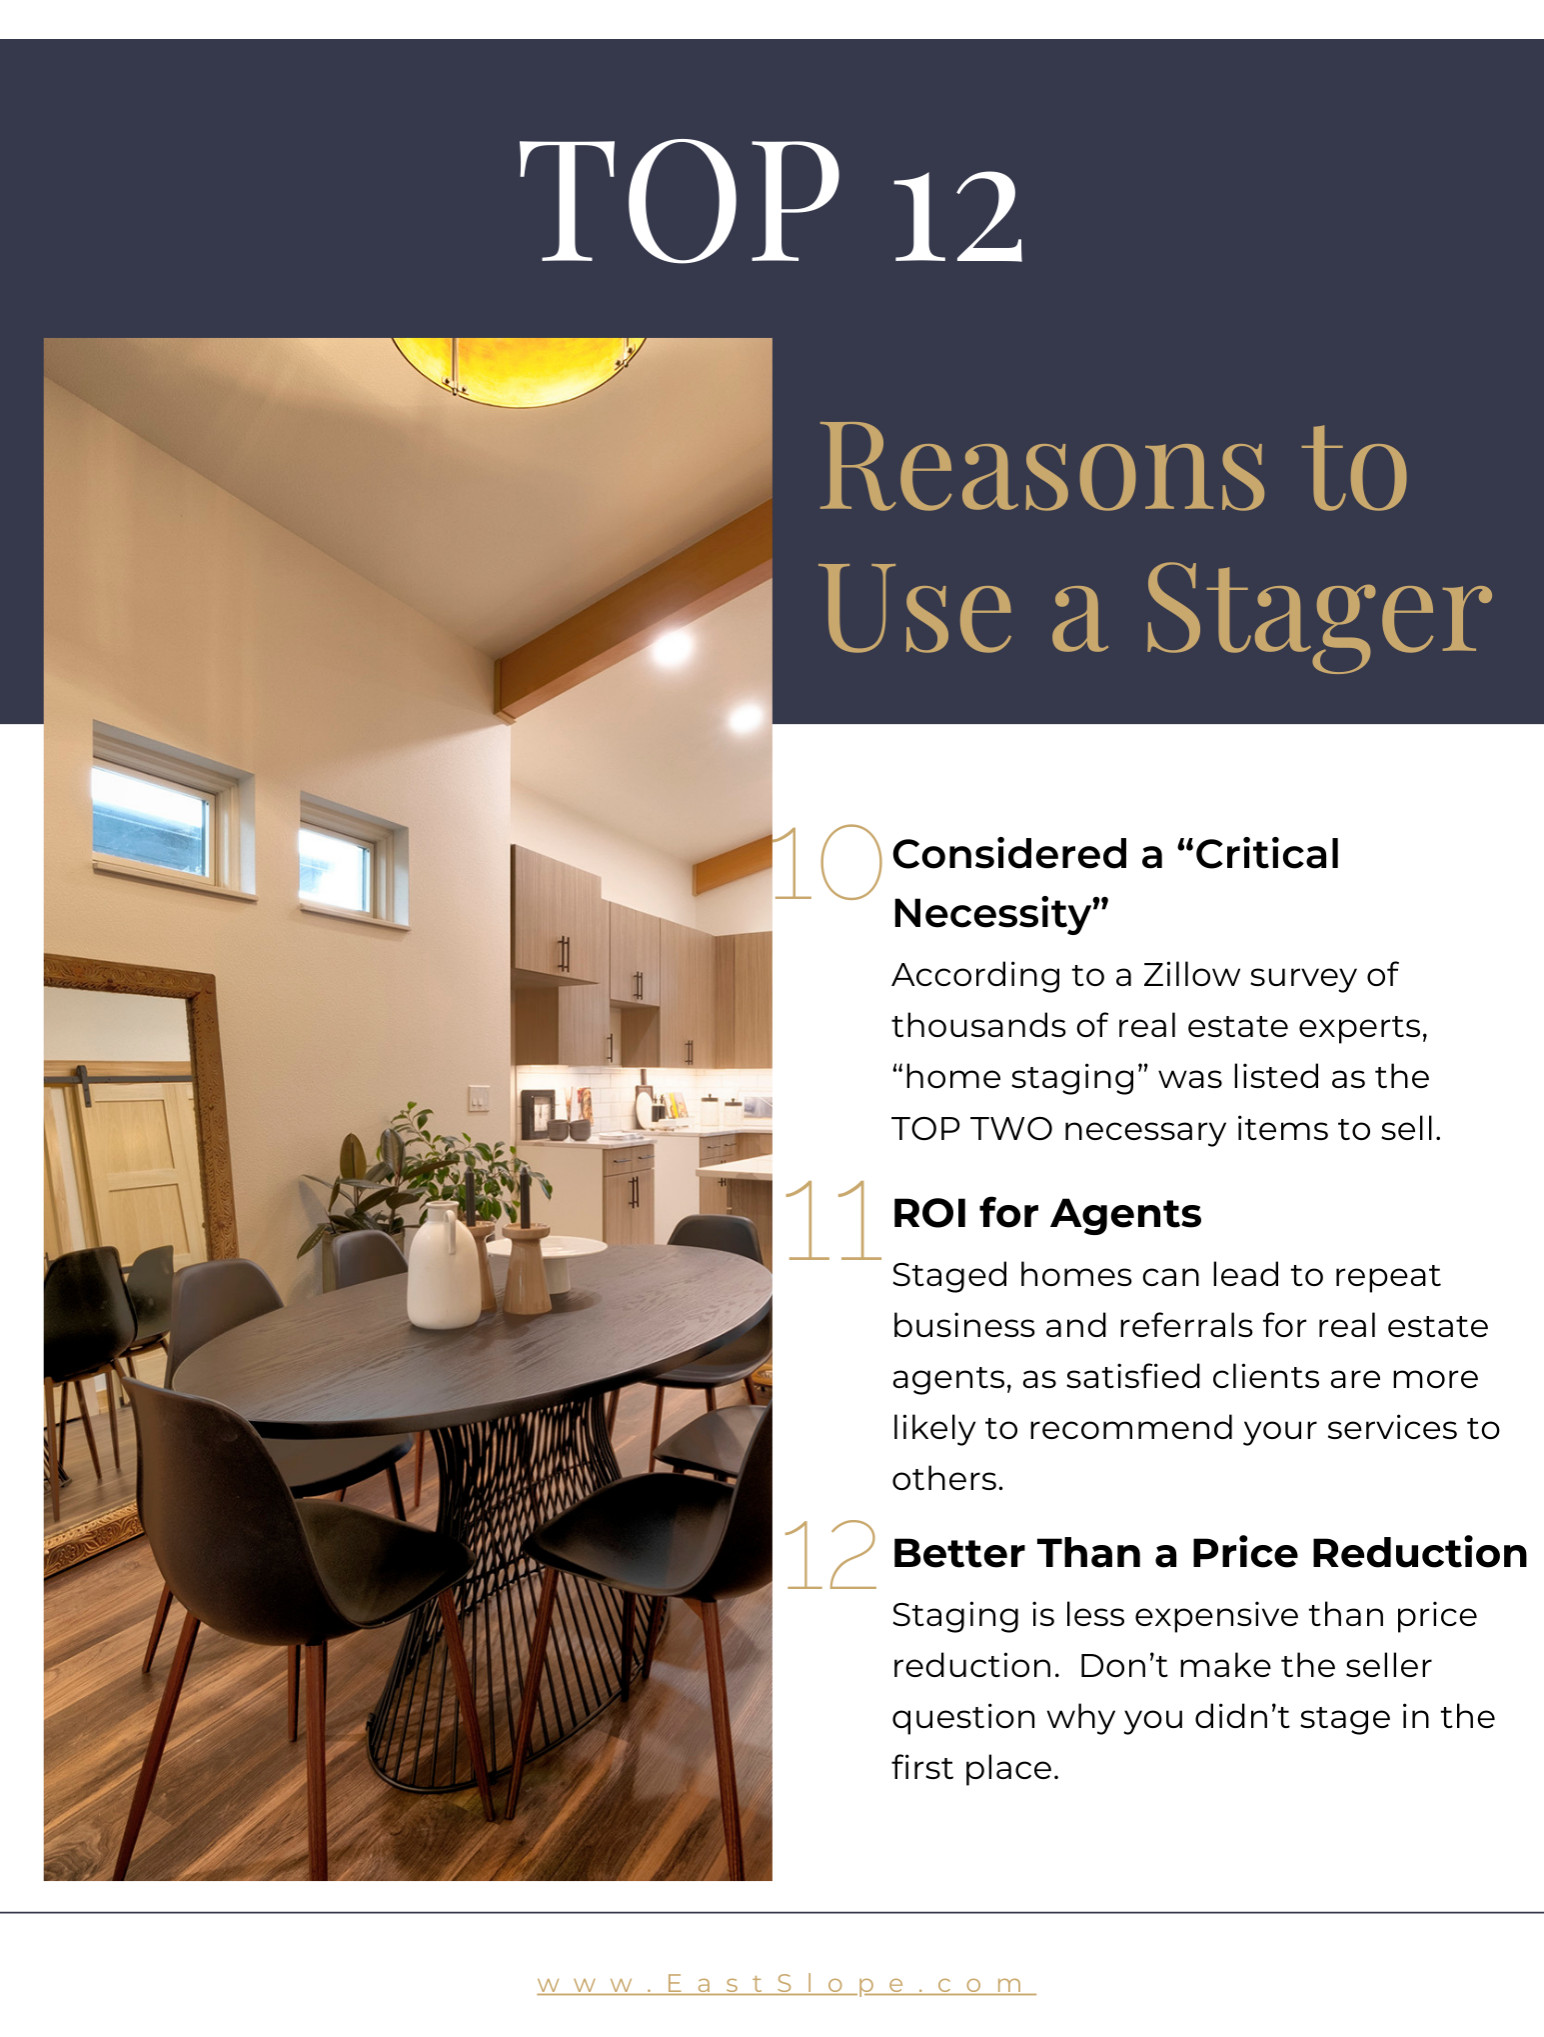 Reasons to Partner With East Slope Design